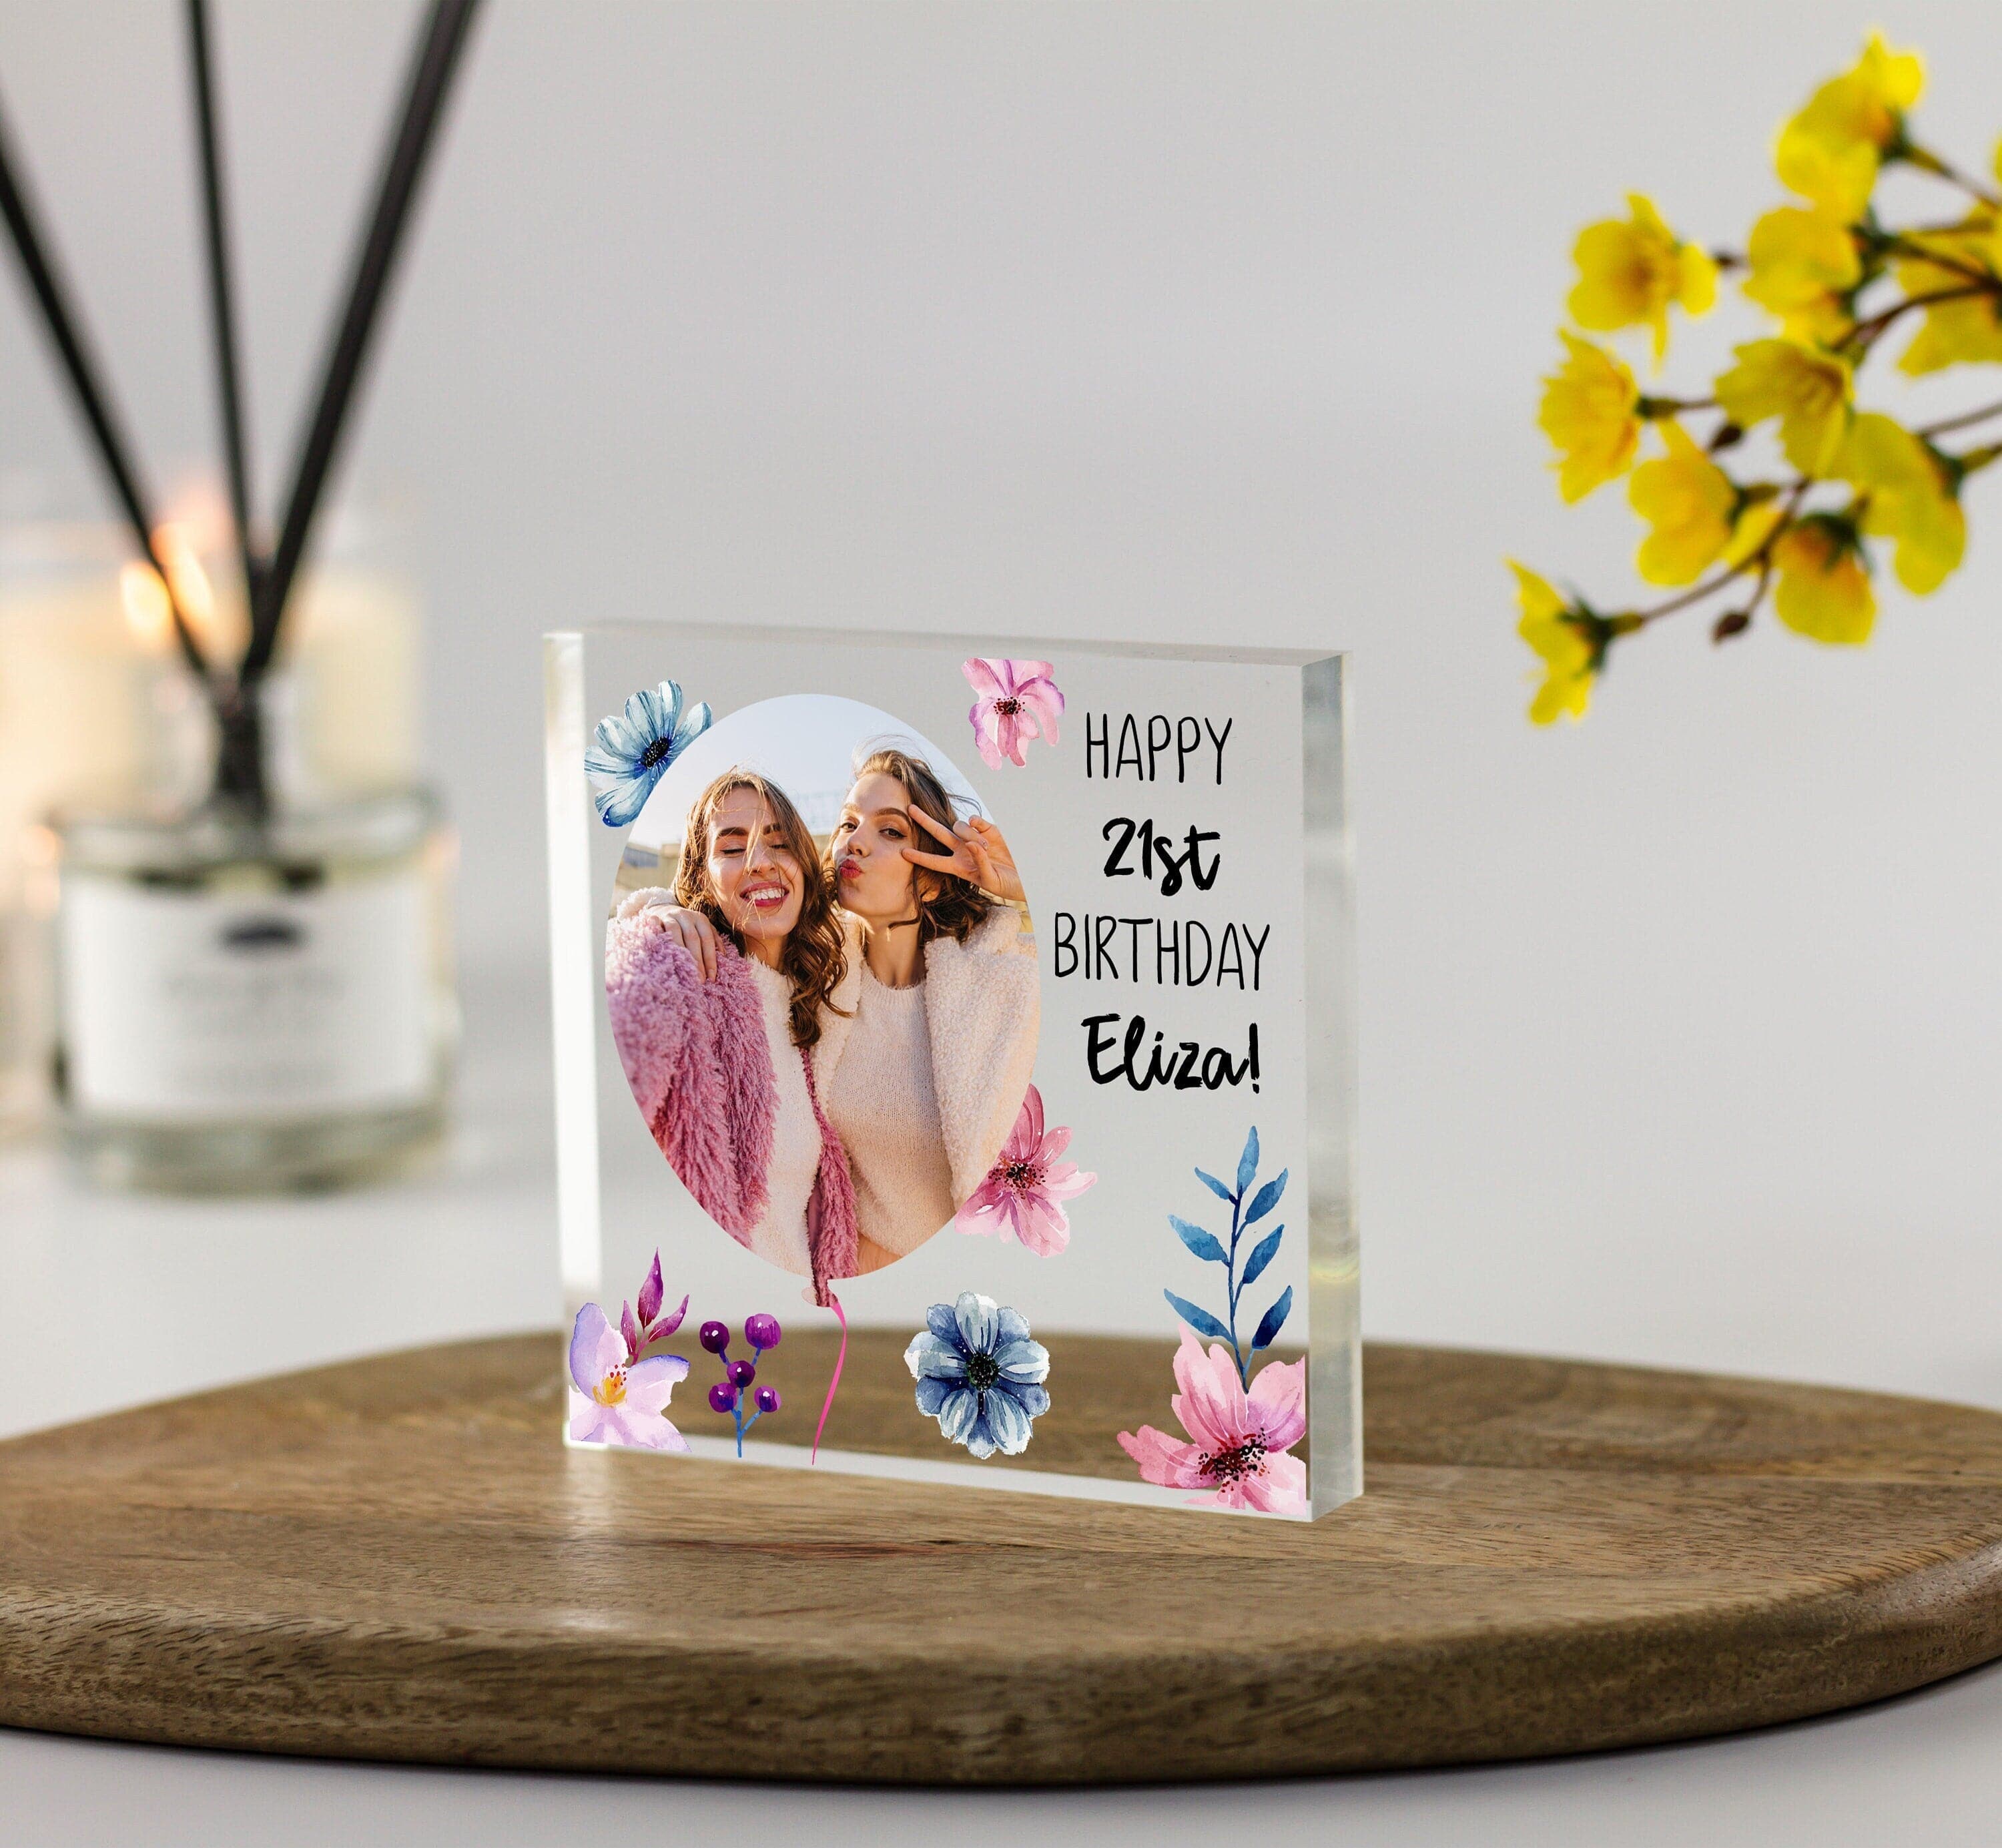 21st Birthday Best Friend Gift, Personalised Gift for Her, BFF Birthday Gift, Besties Gift, Photo Clear Acrylic Block